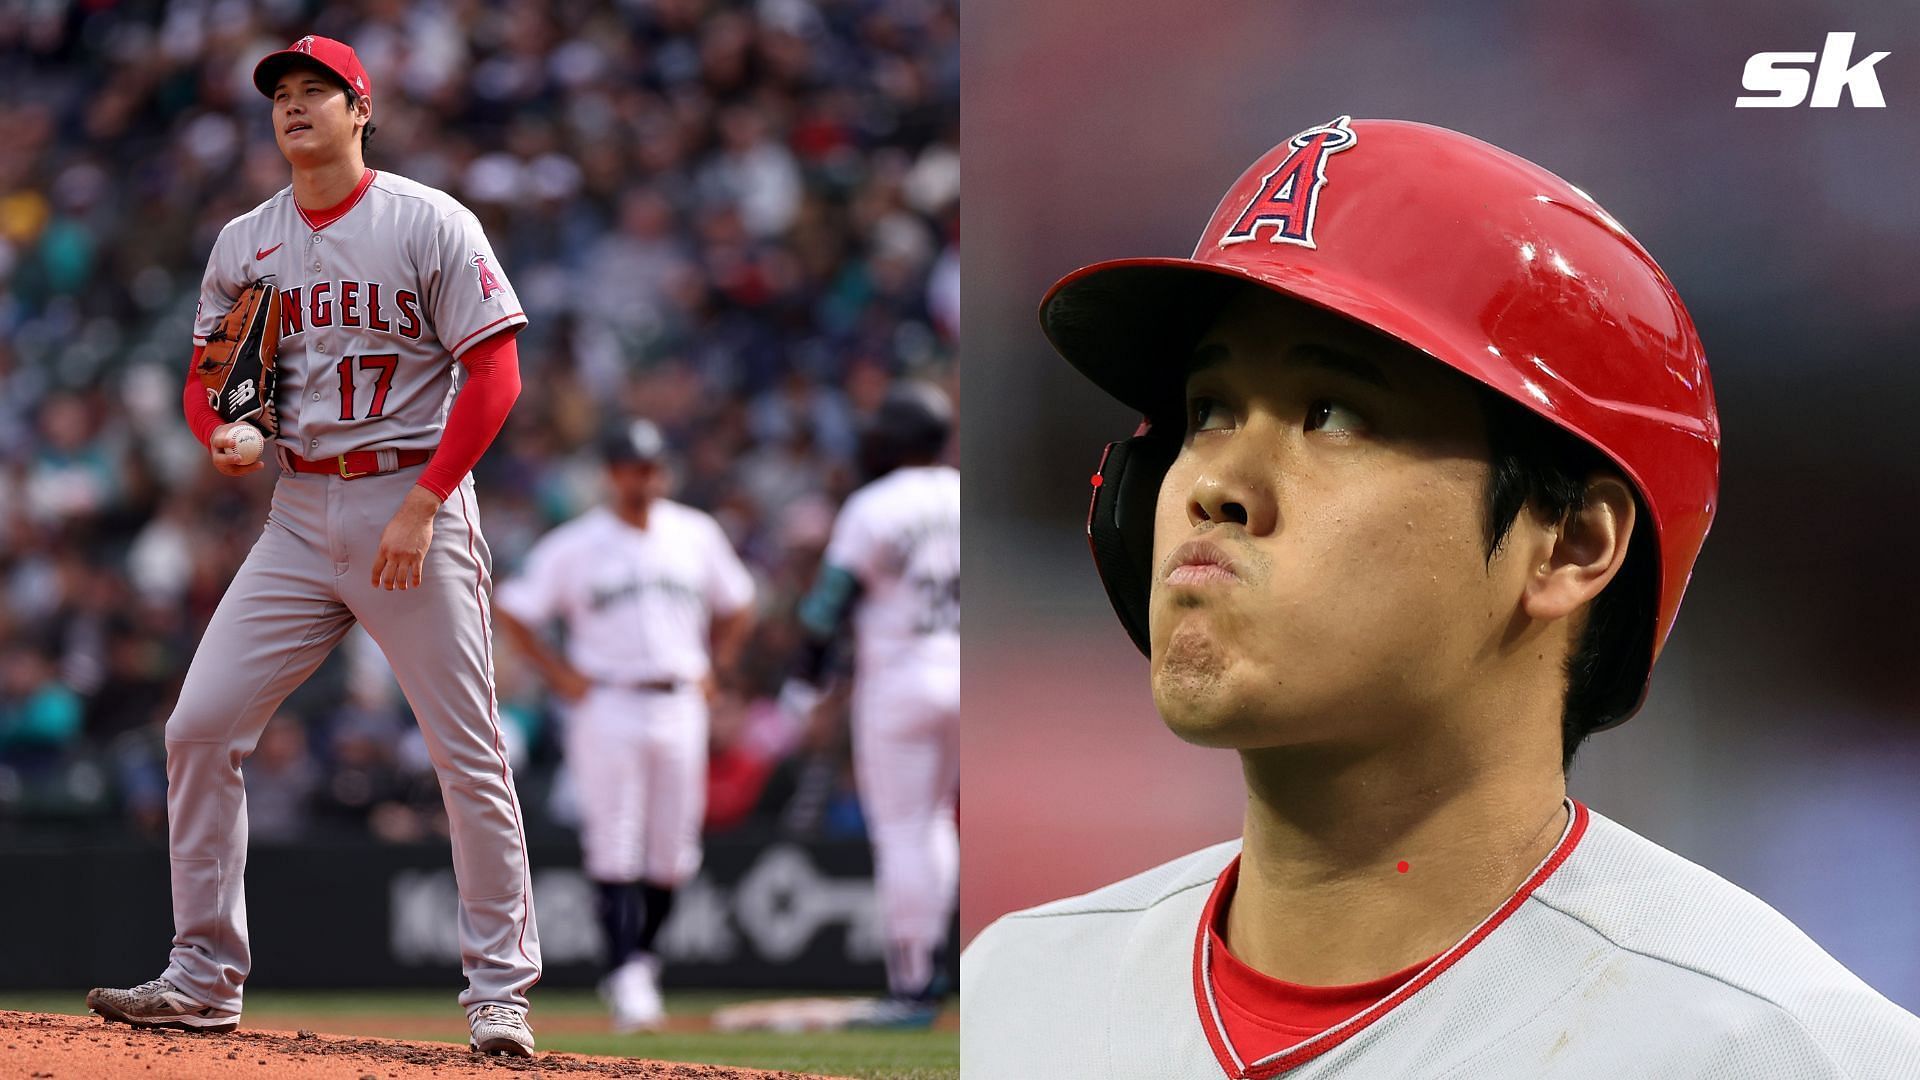 Shohei Ohtani might not be going to Seattle according to inside rumors